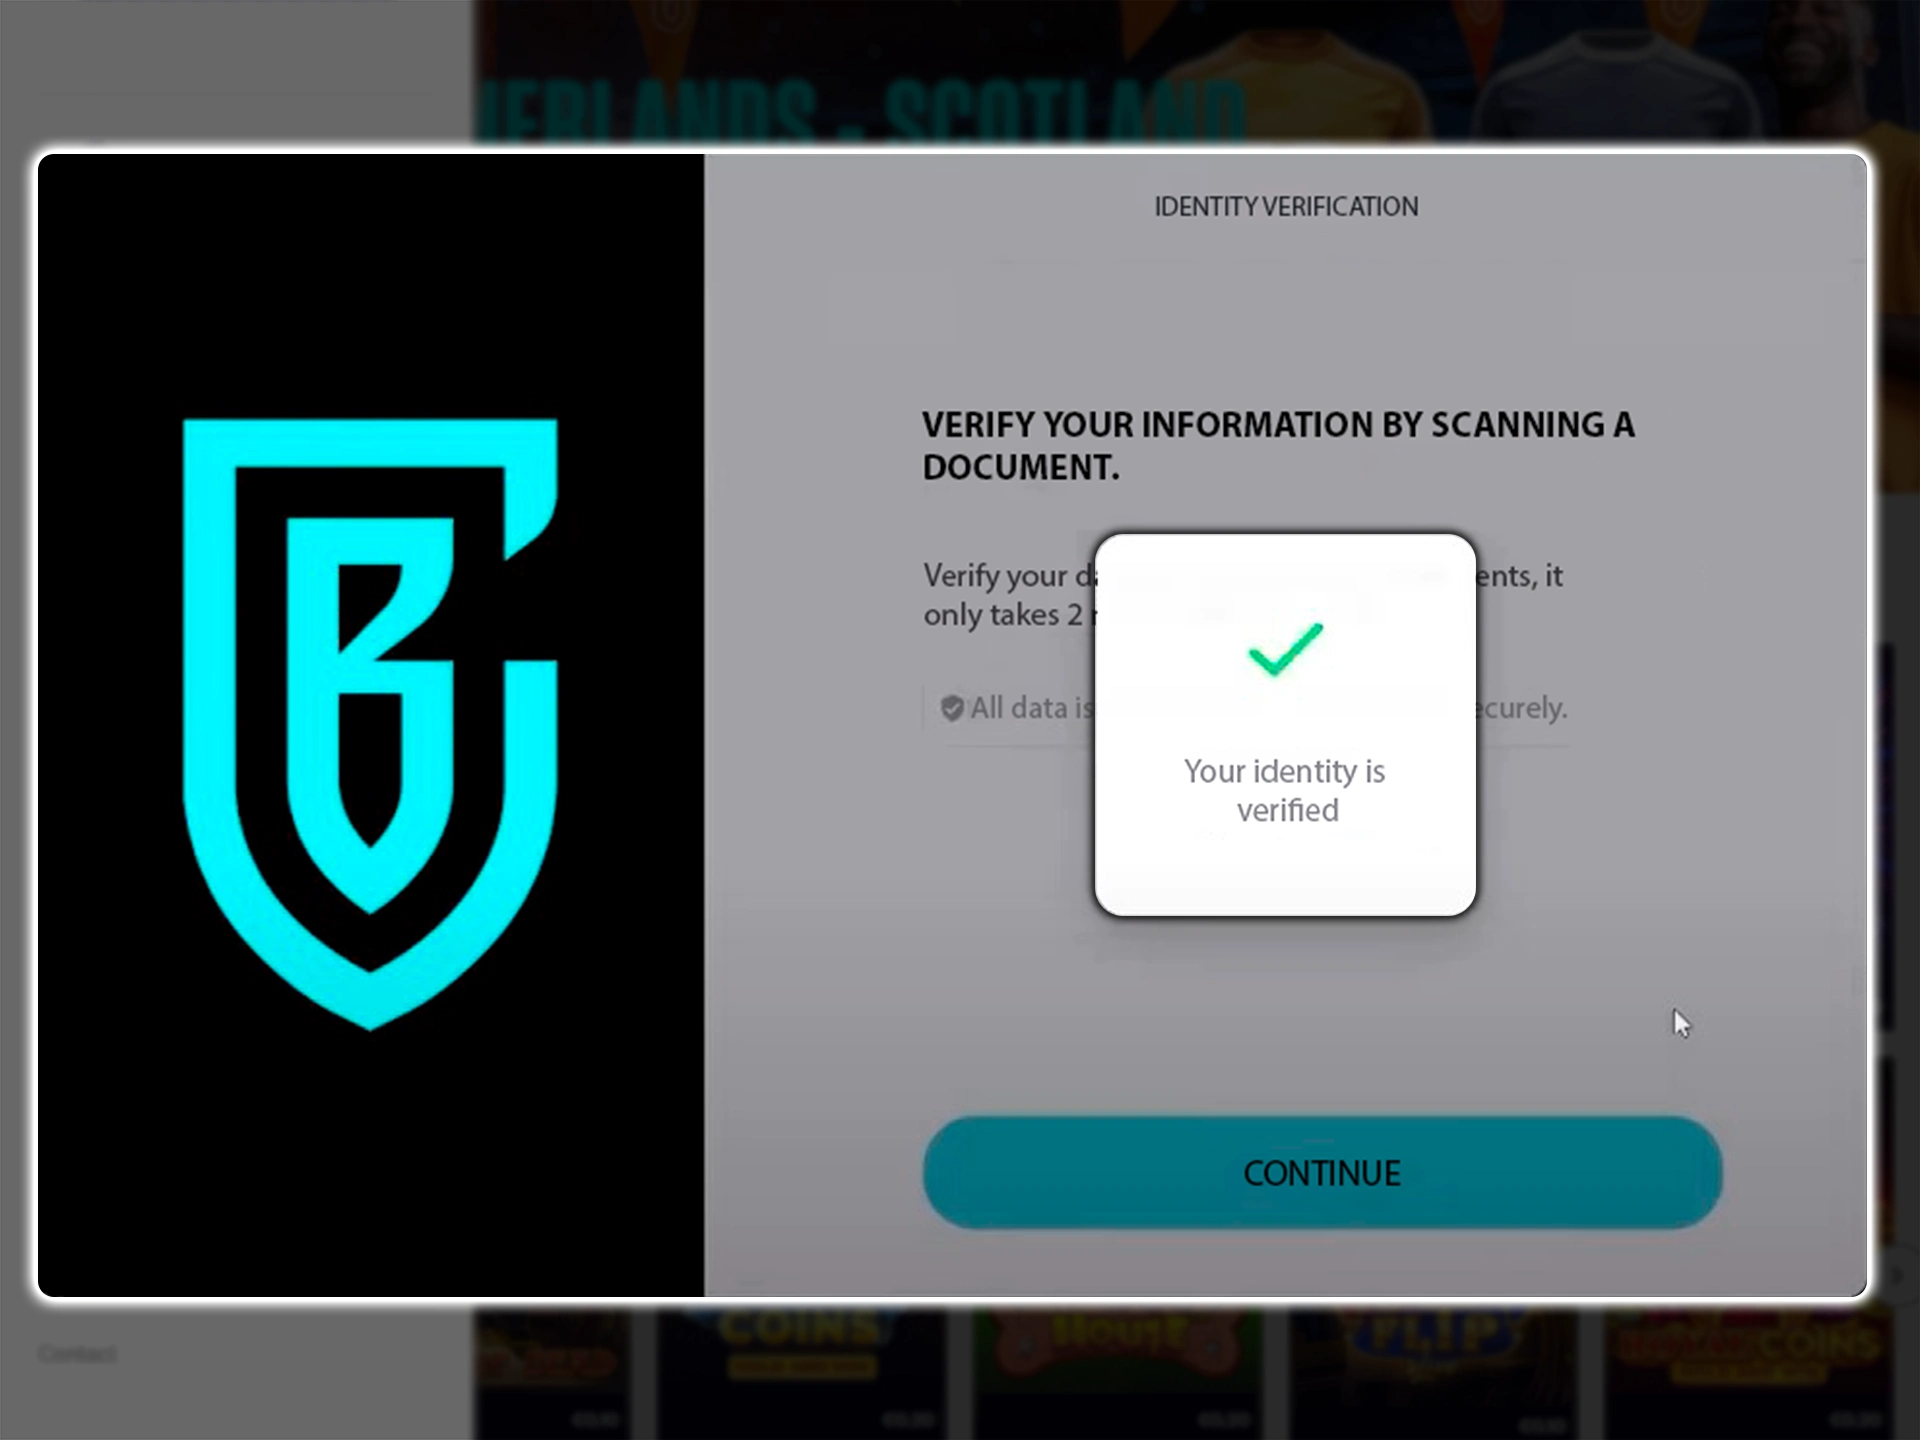 Provide proof of your identity and wait for confirmation from Betcity.